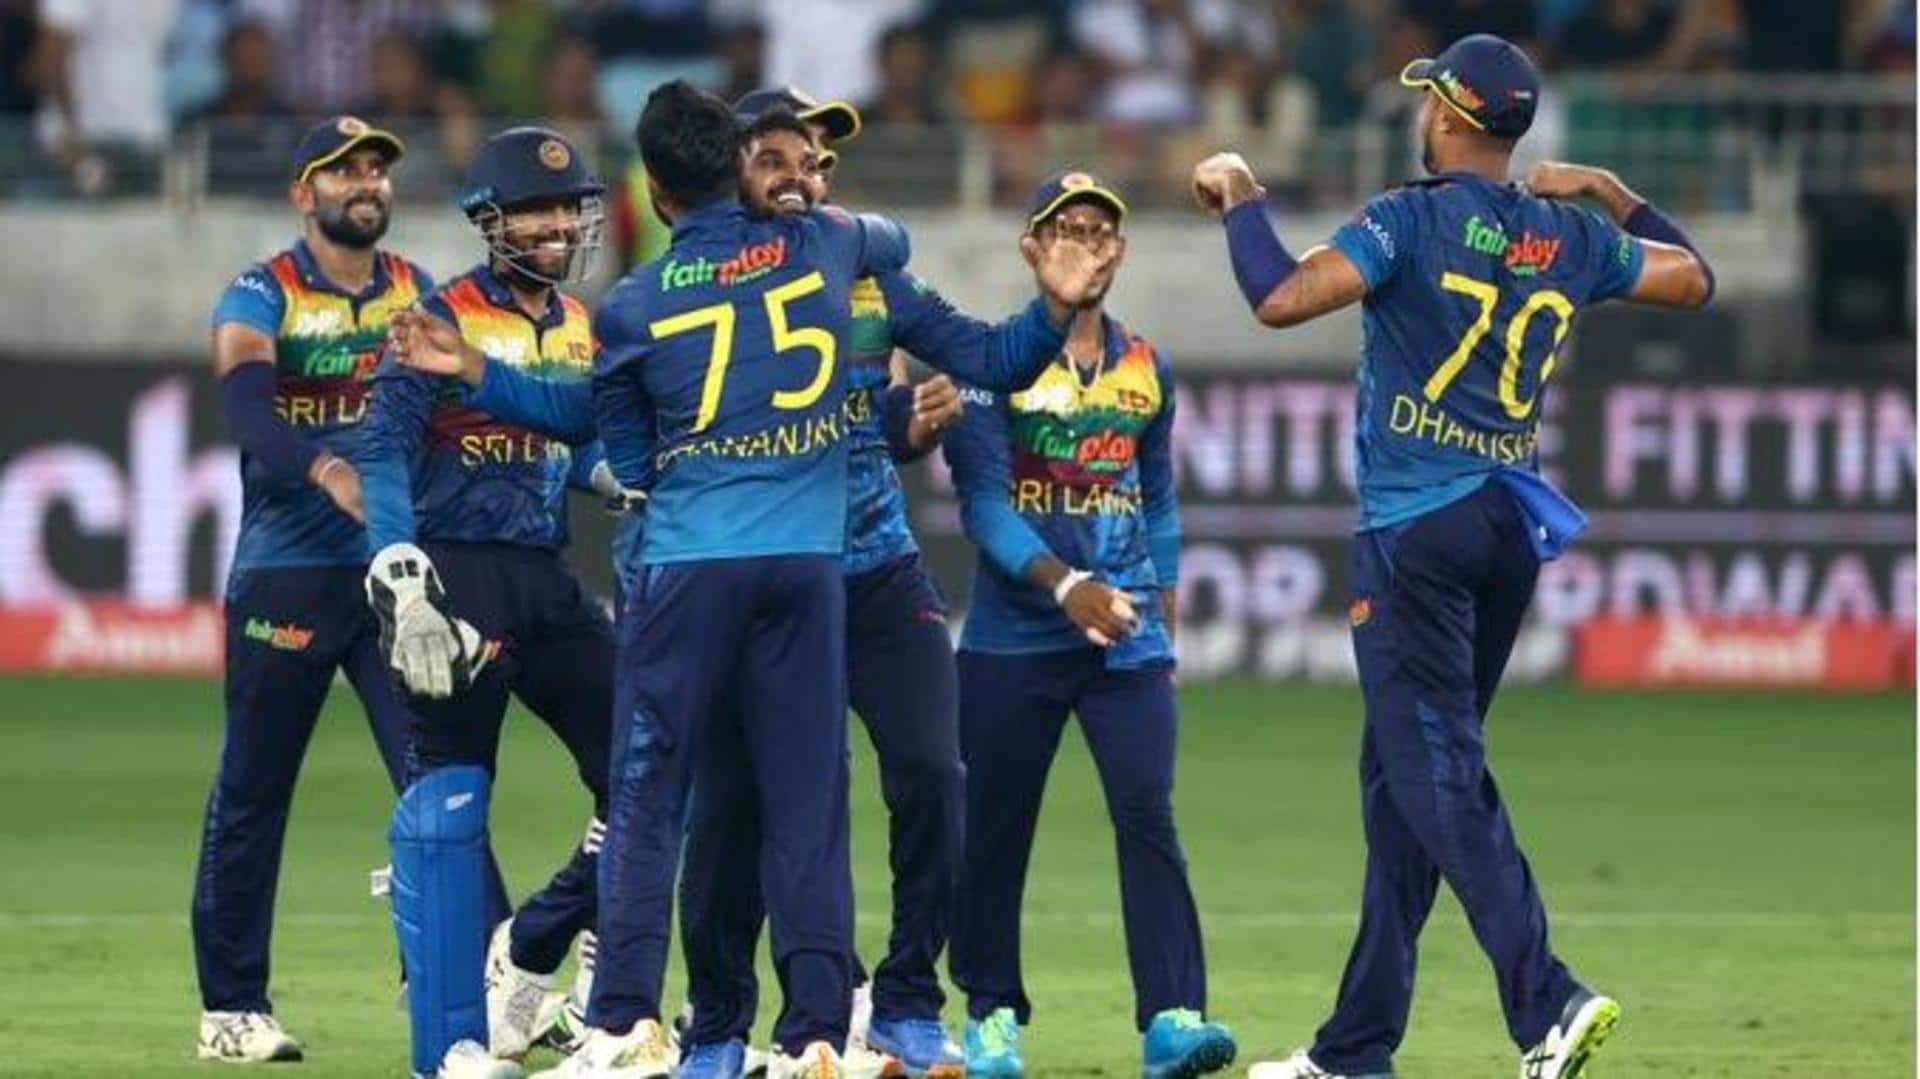 SL qualify for 2023 WC: Decoding their journey in Qualifiers